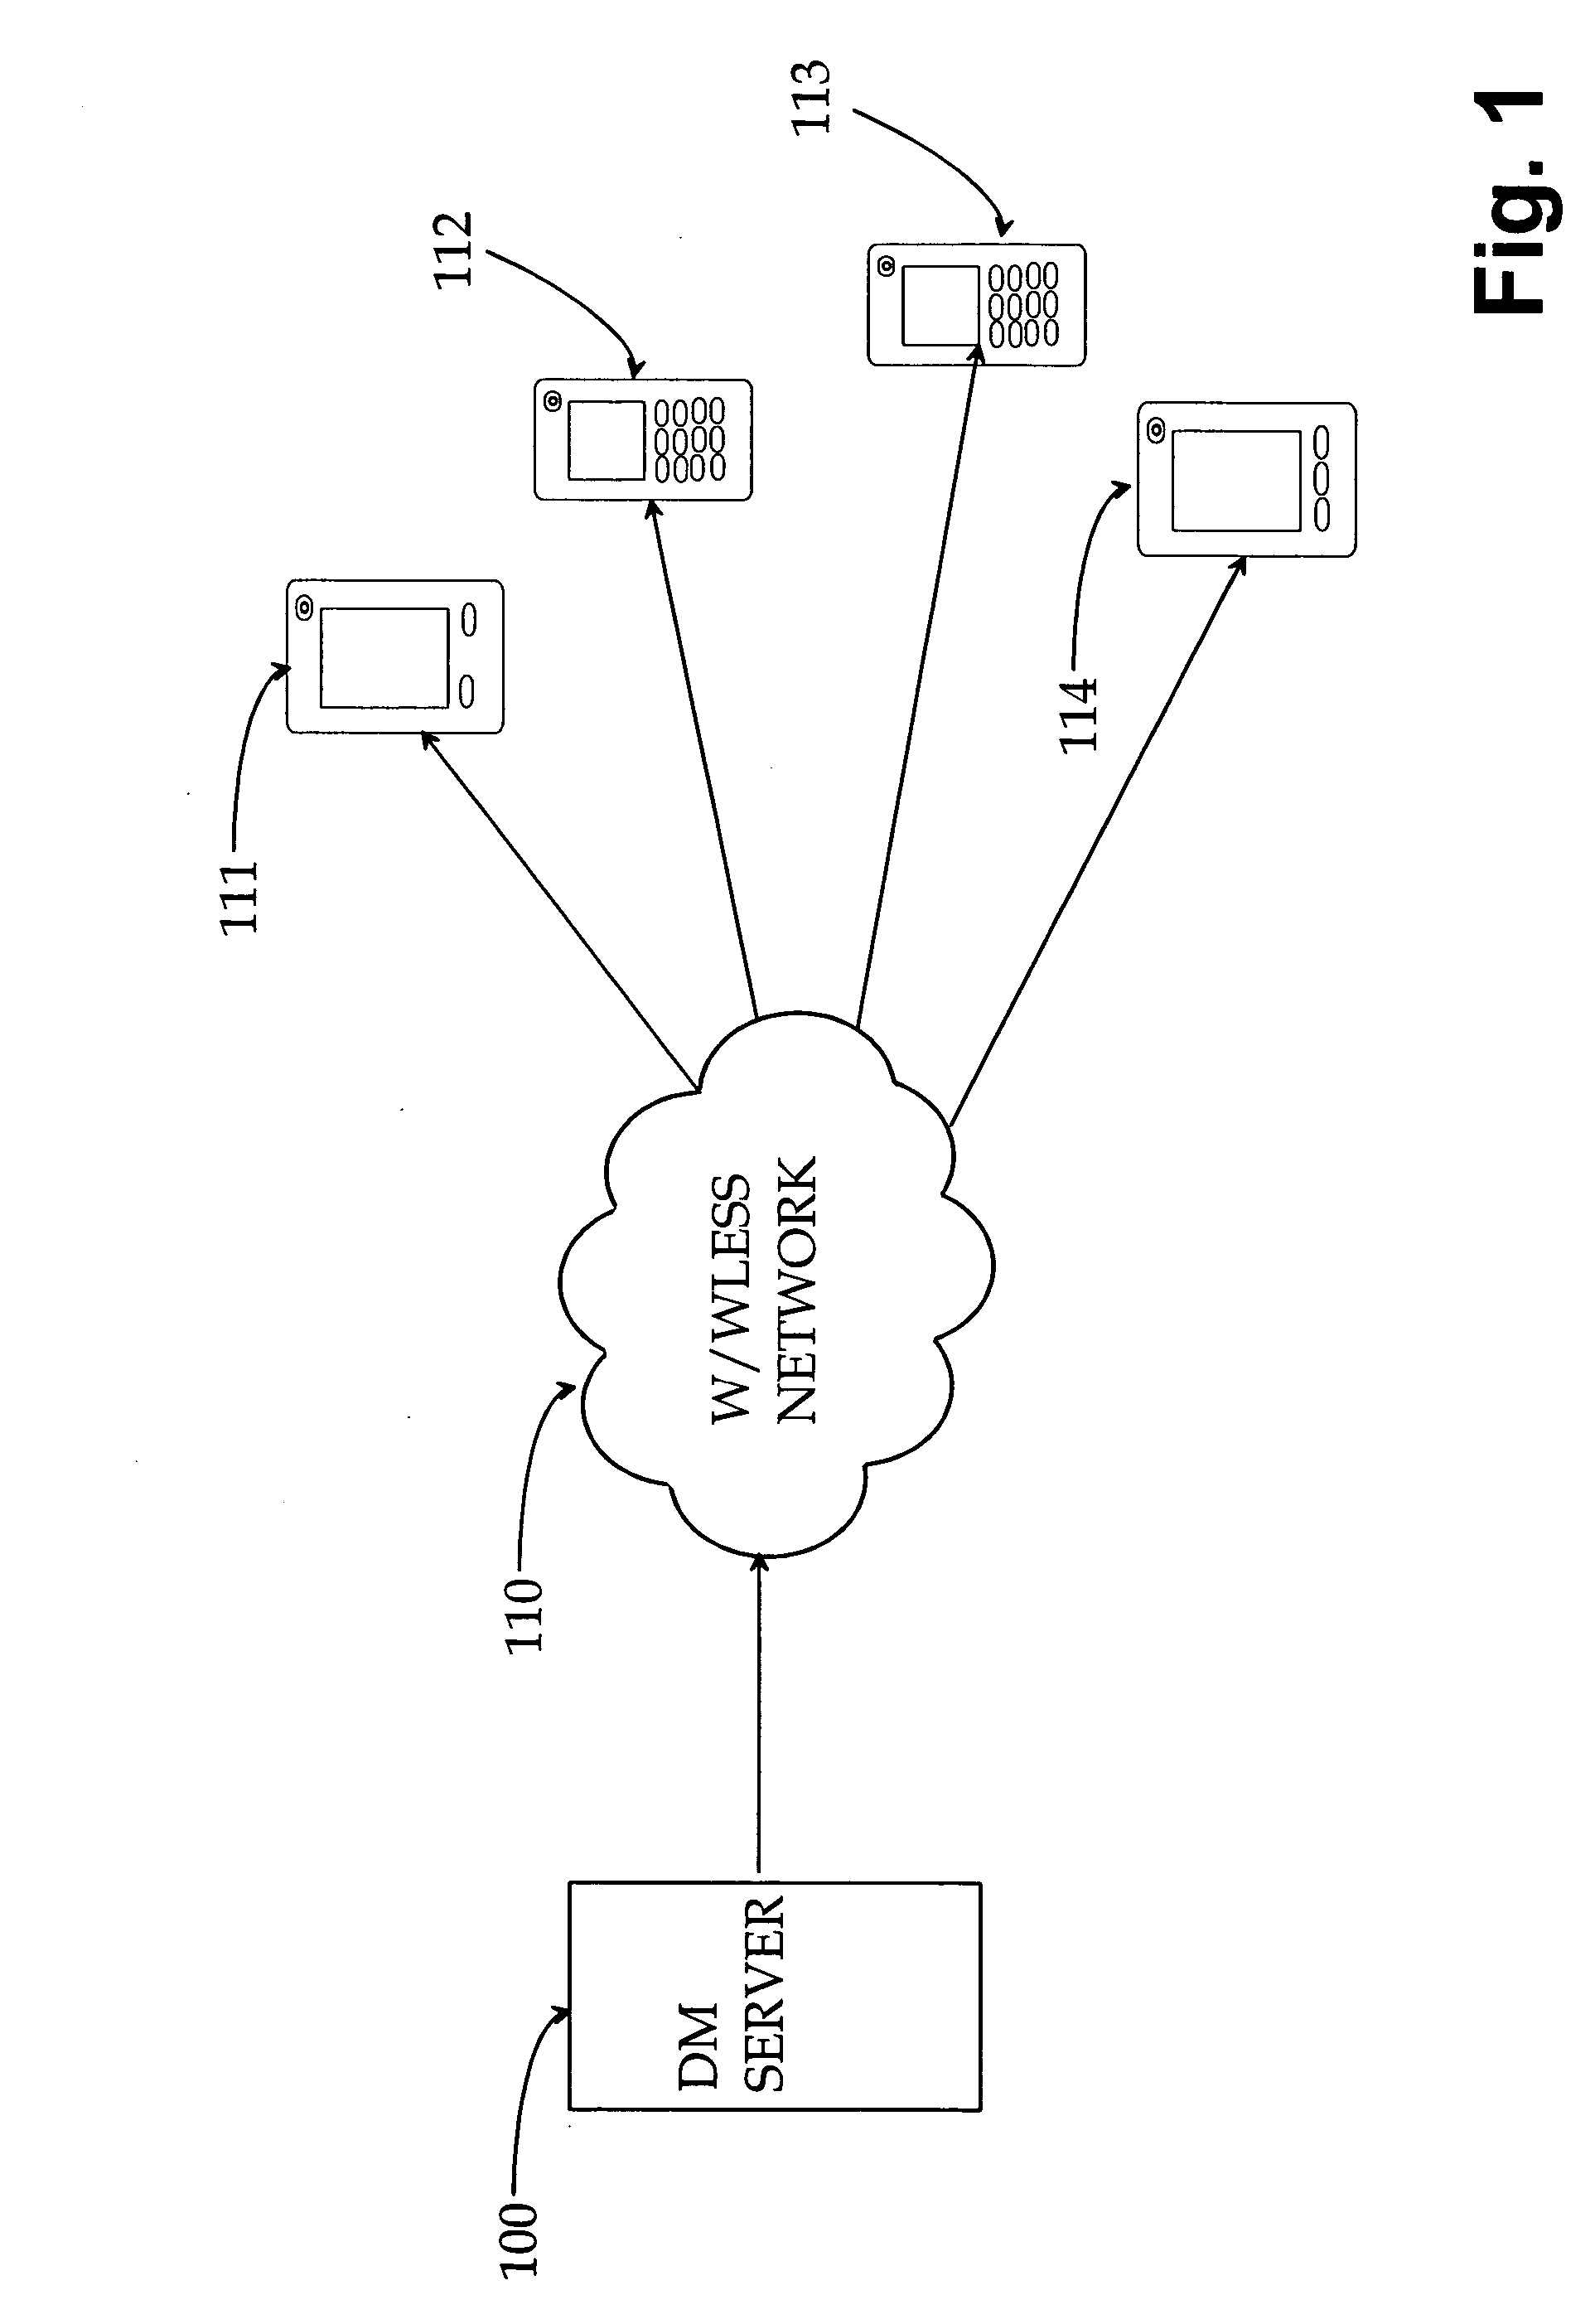 Device management with configuration information